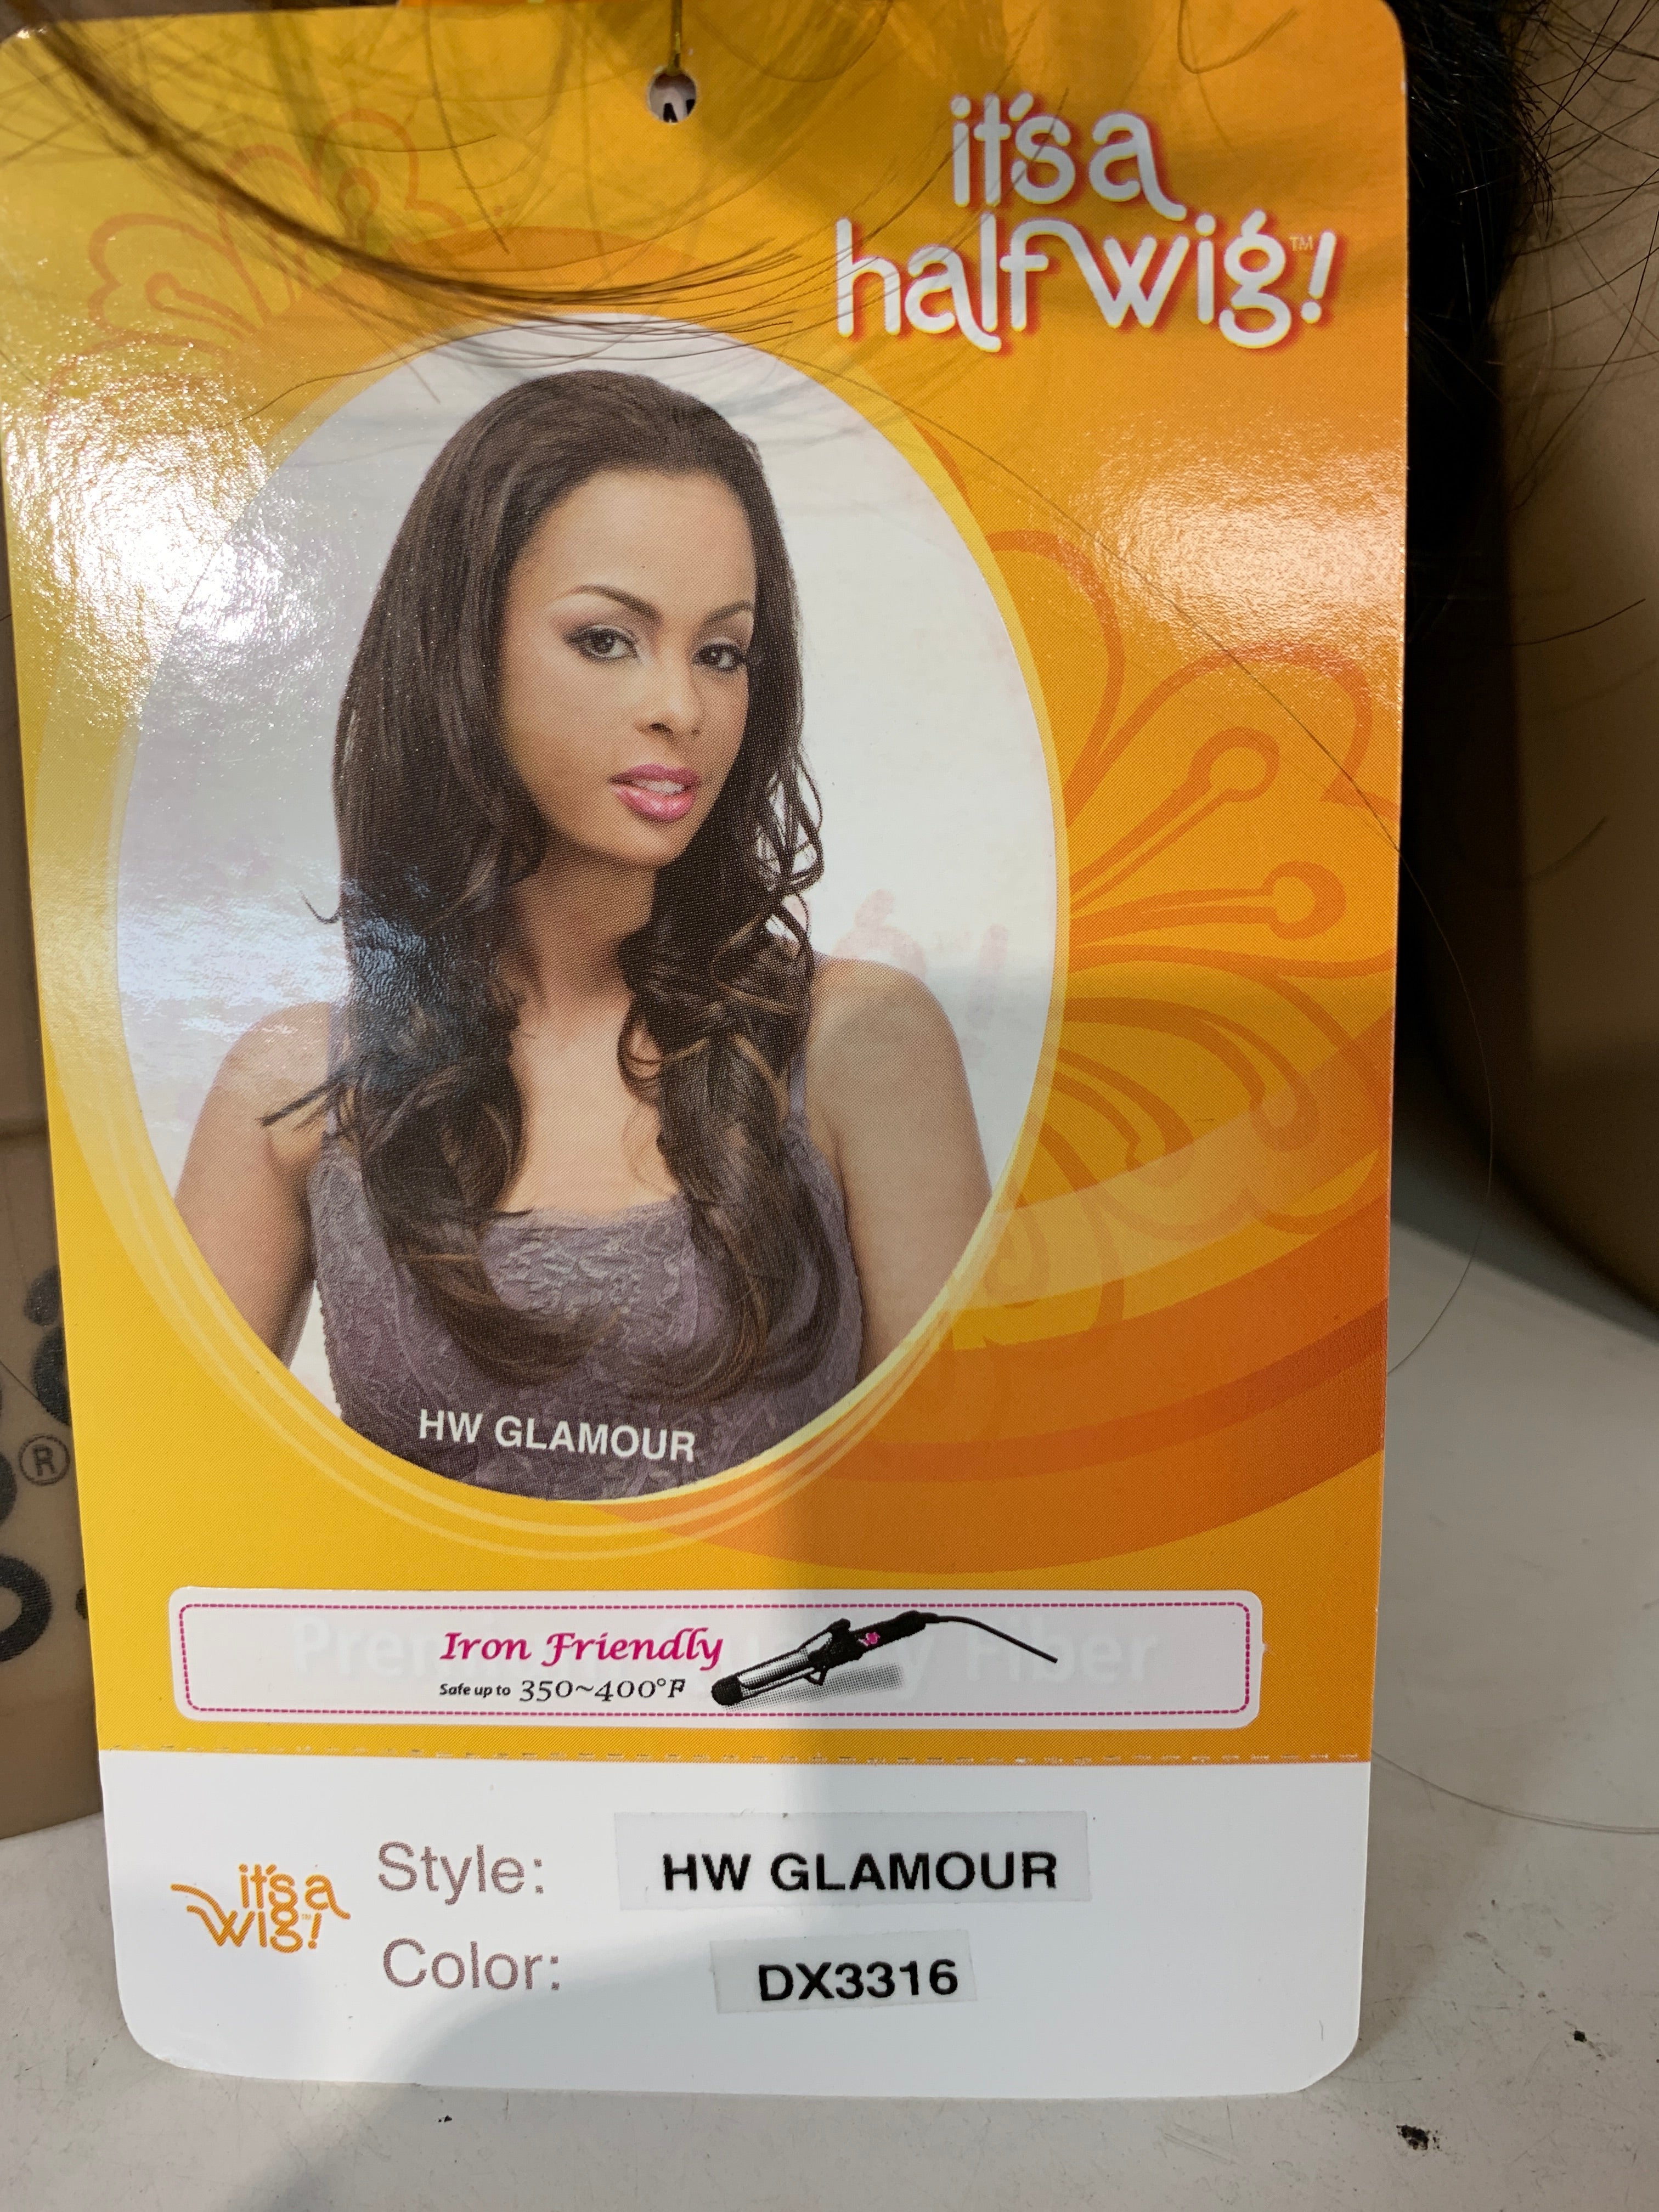 It’s a wig hw glamour